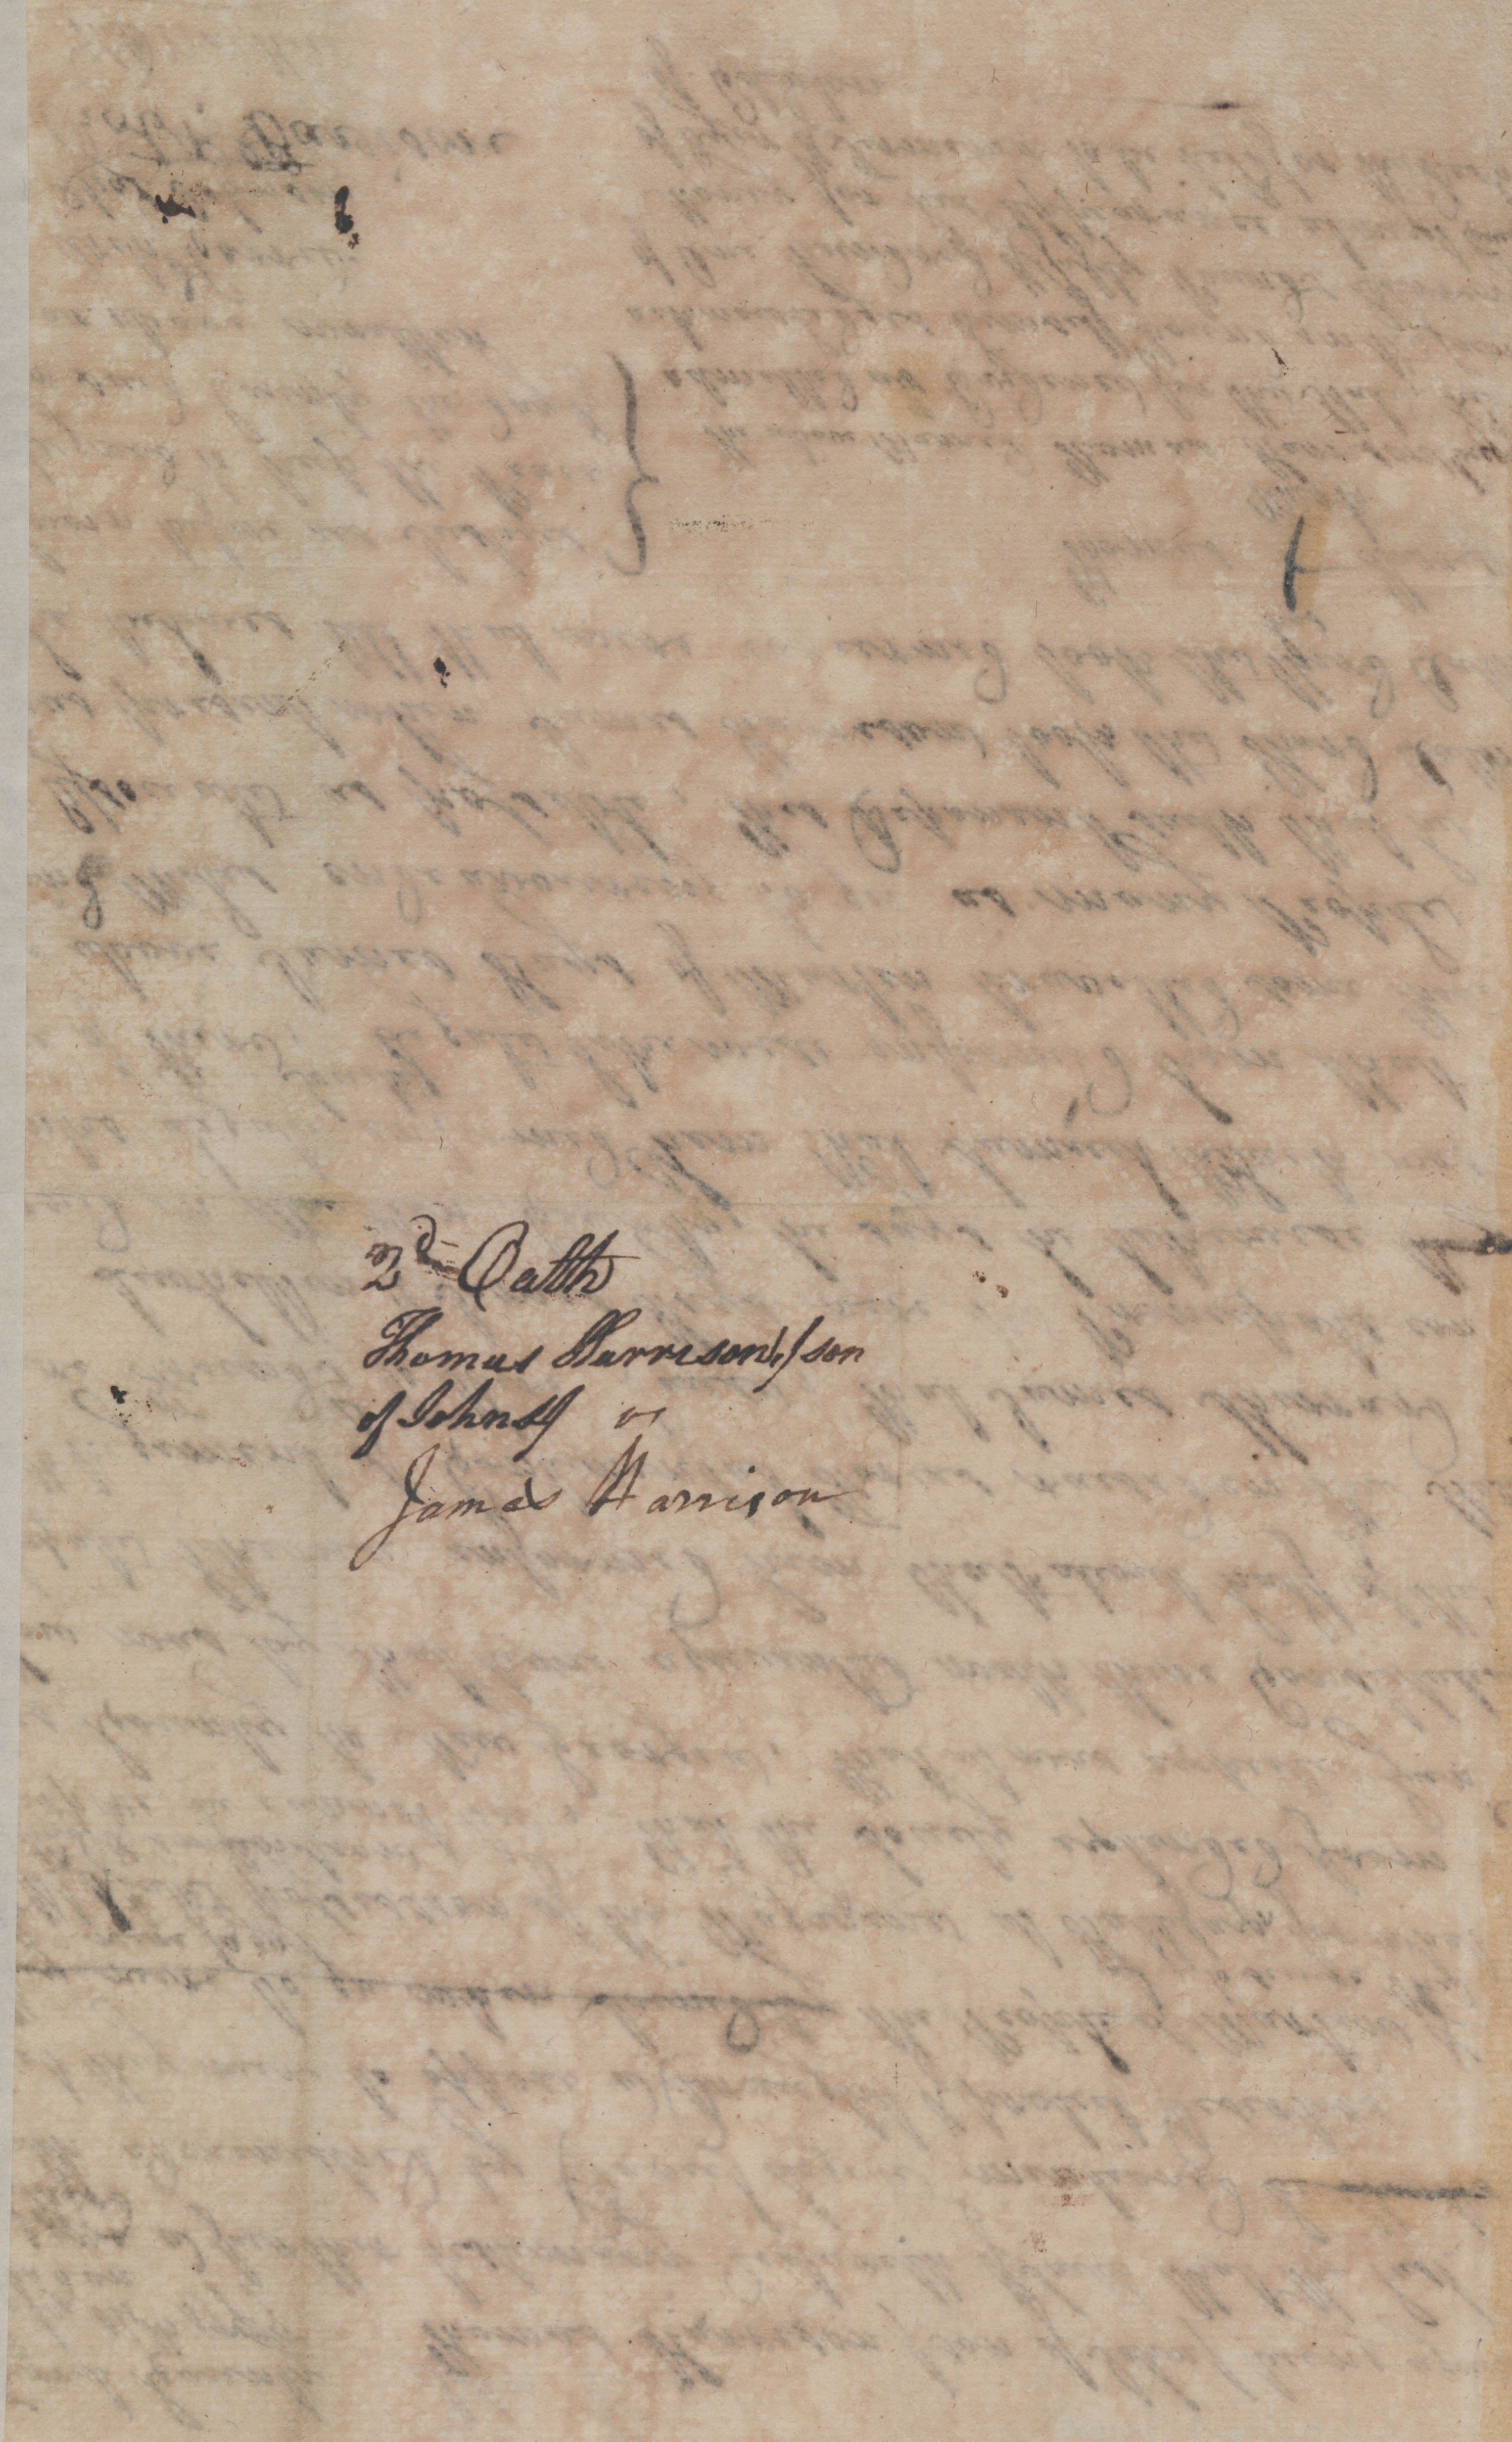 Deposition of Thomas Harrison Jr., 14 July 1777, page 2